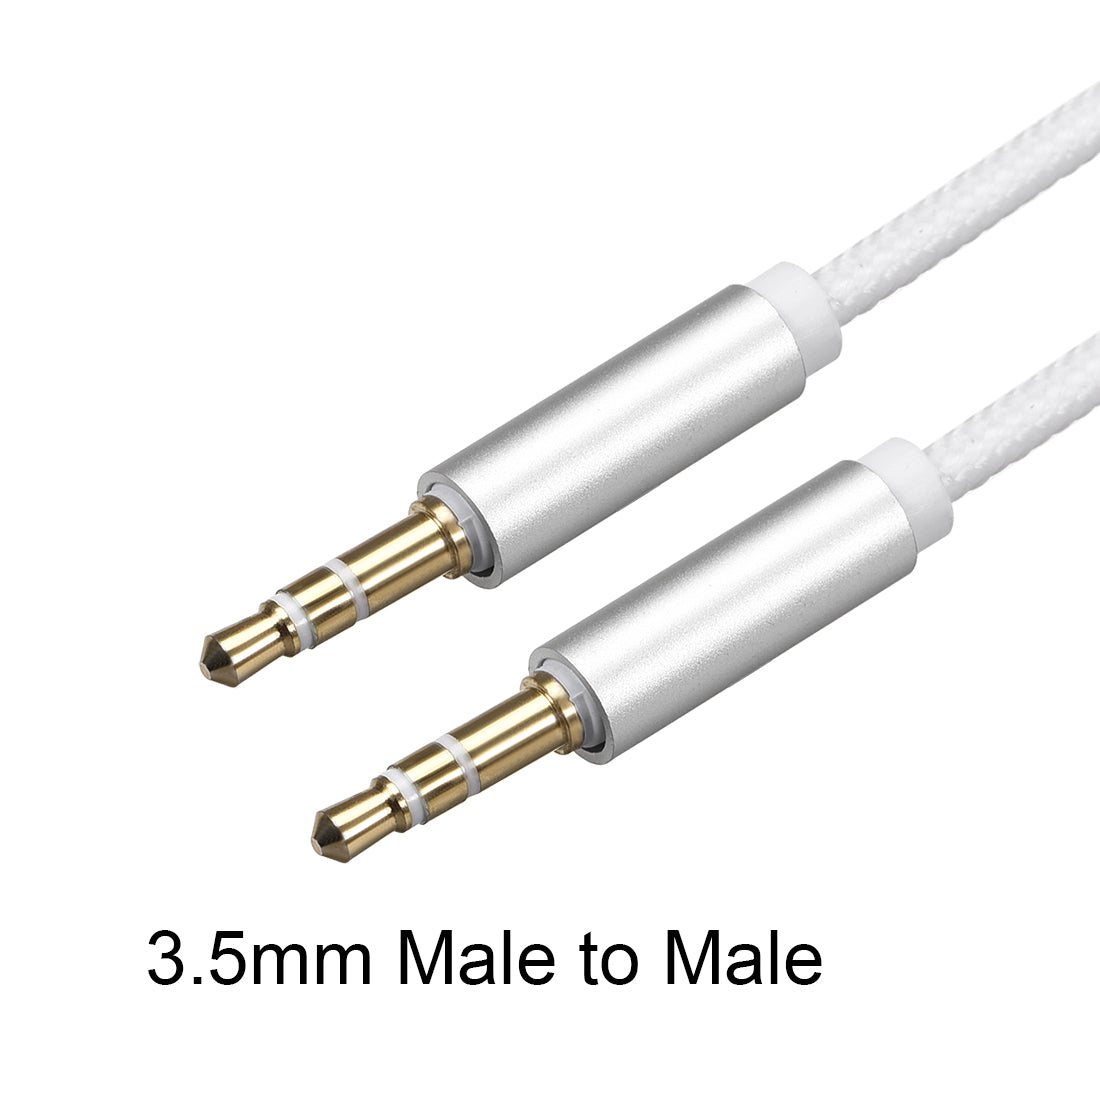 uxcell Uxcell 3.5mm Male to Male  Cable Stereo  Extension, 1 Meter Long, Nylon Sheathed, for Headphones Smartphones Notebooks, White